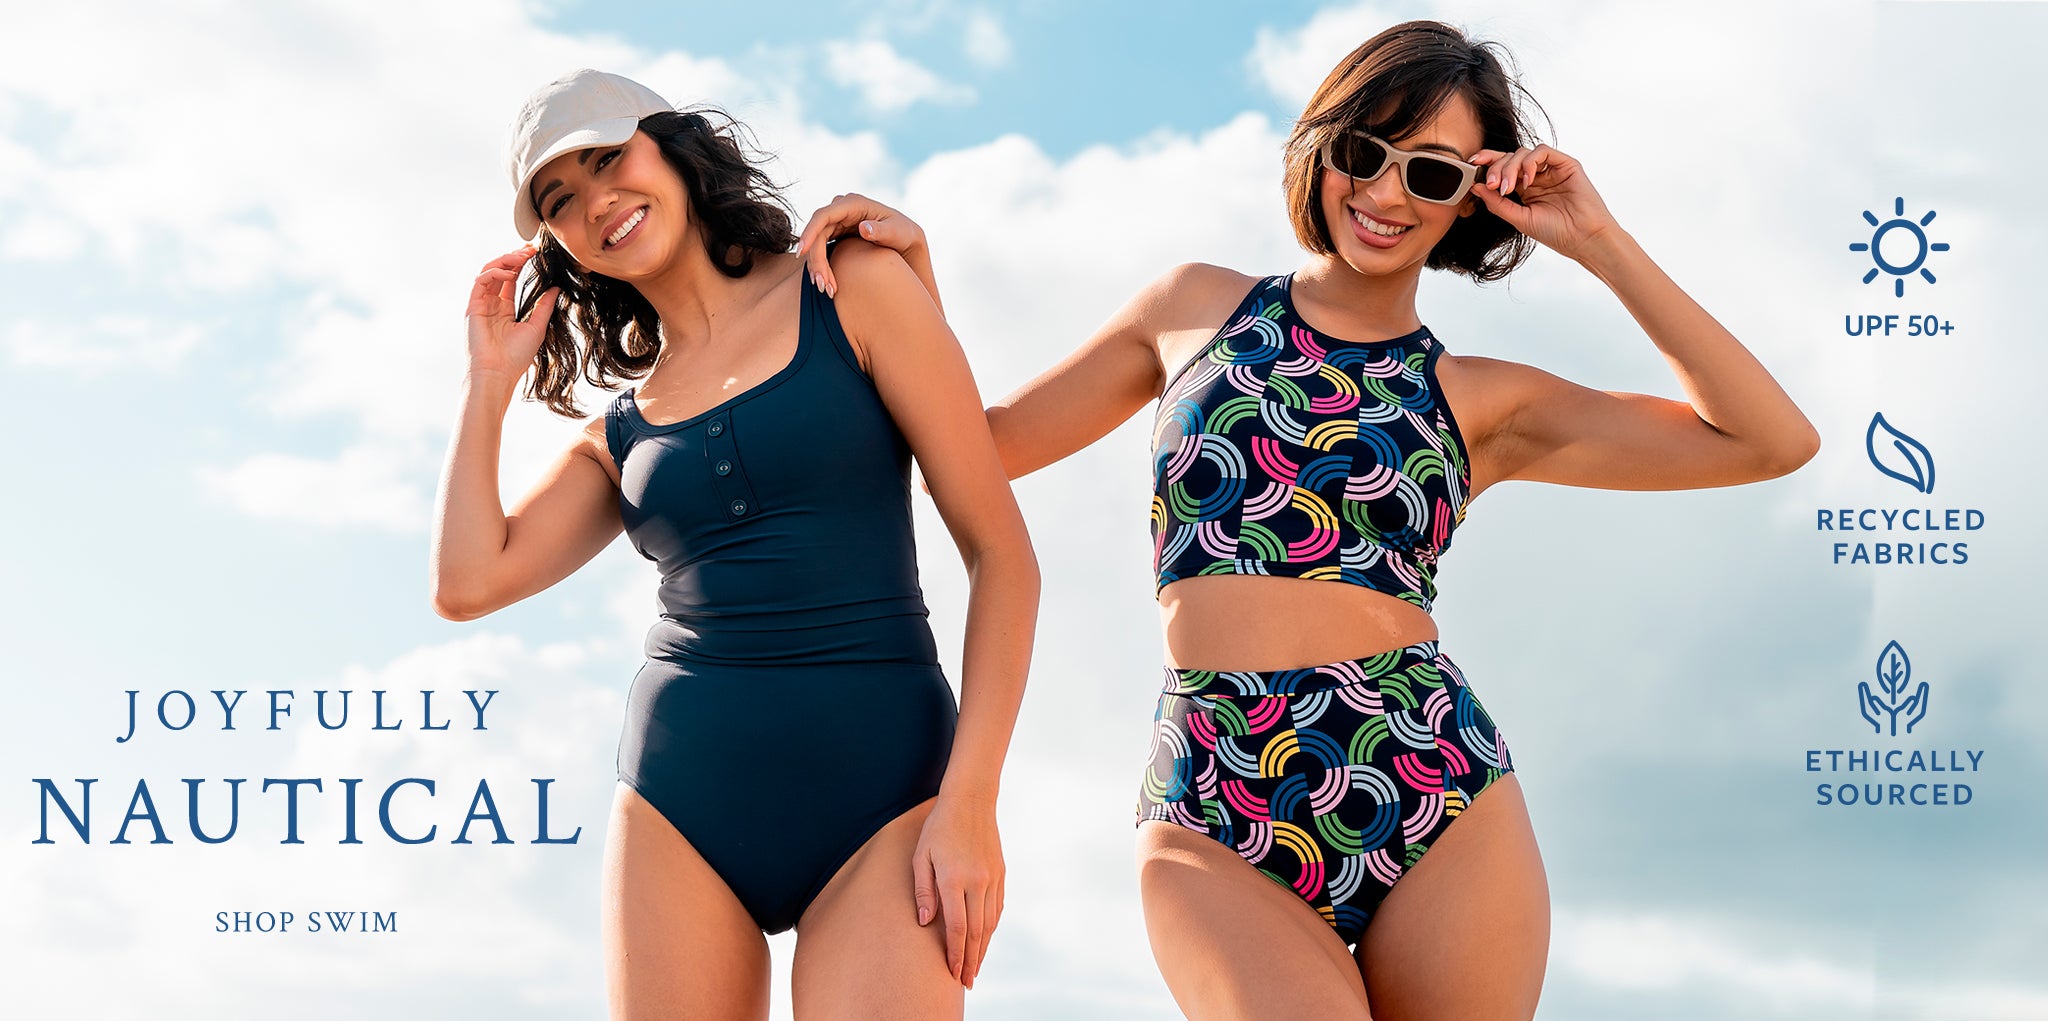 Two women in swimsuits with text that reads "Joyfully Nautical"